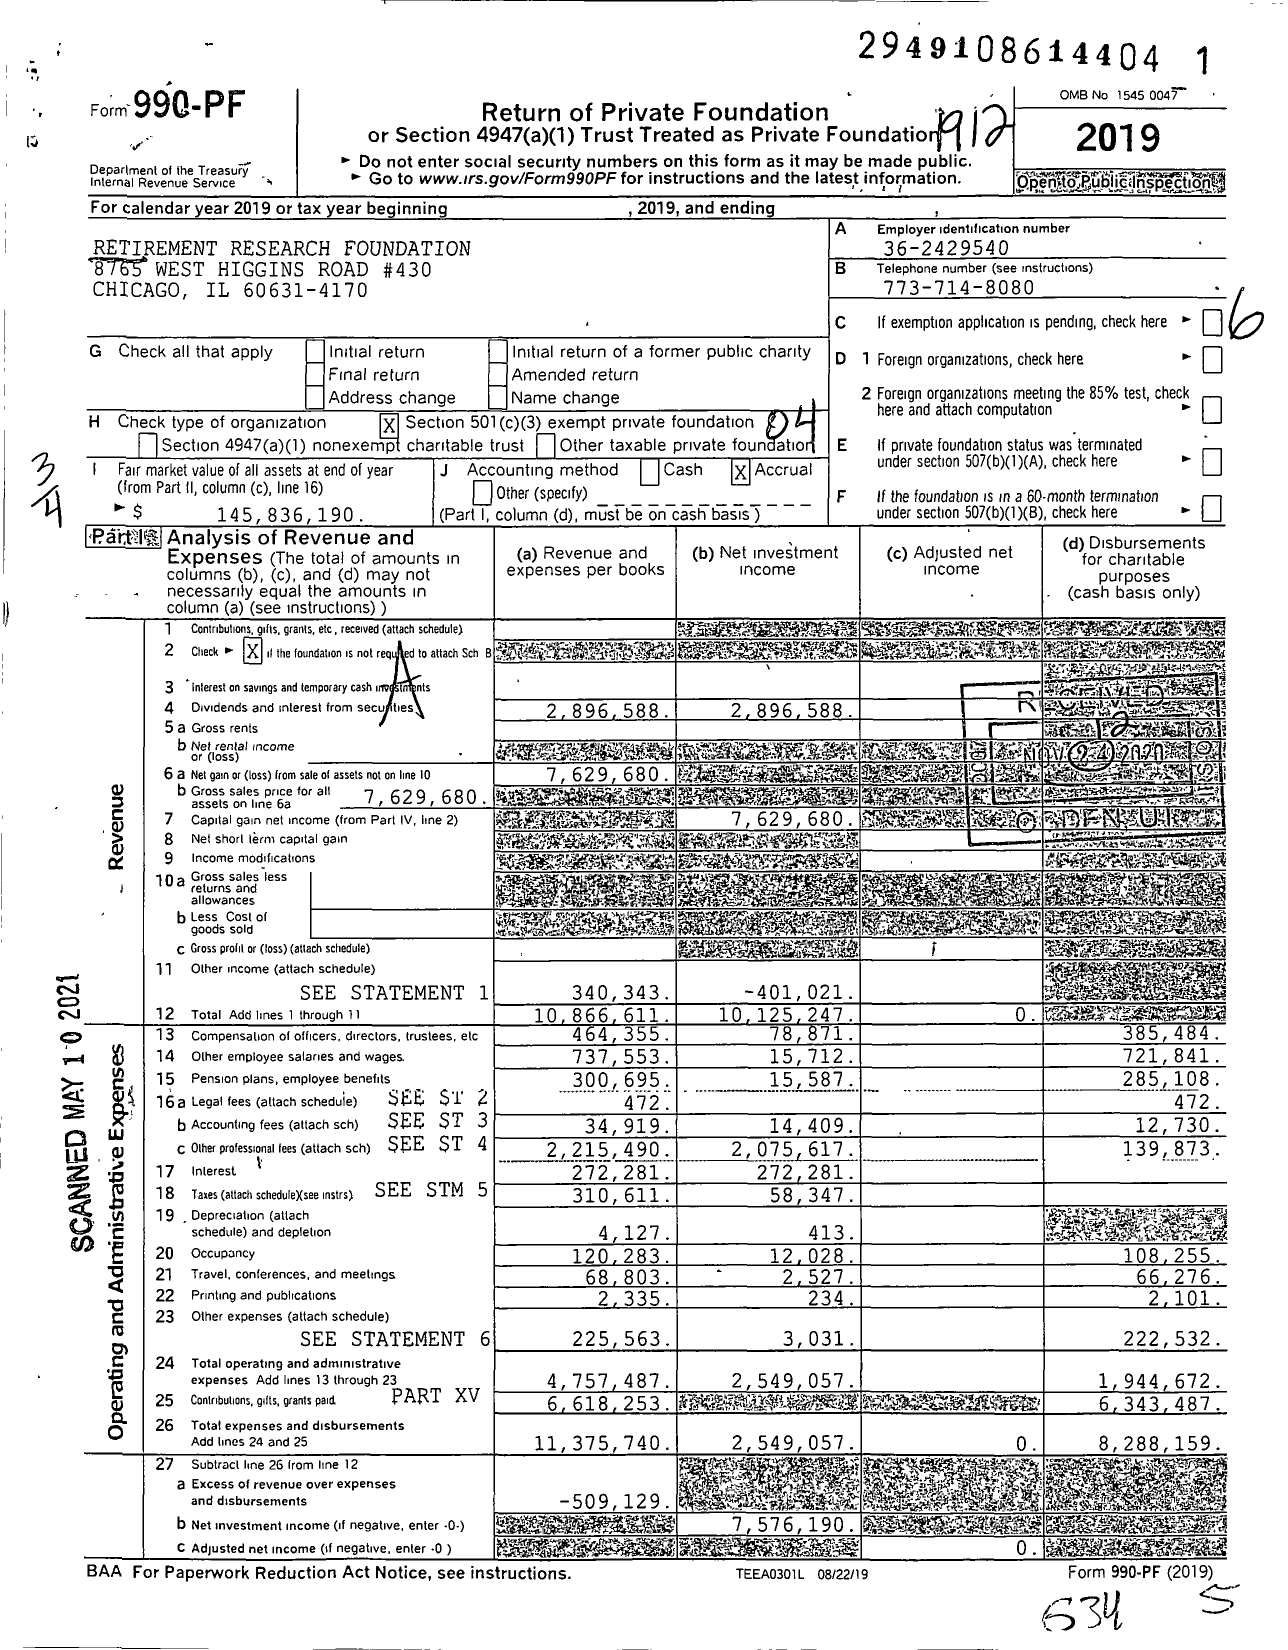 Image of first page of 2019 Form 990PF for Retirement Research Foundation (RRF)